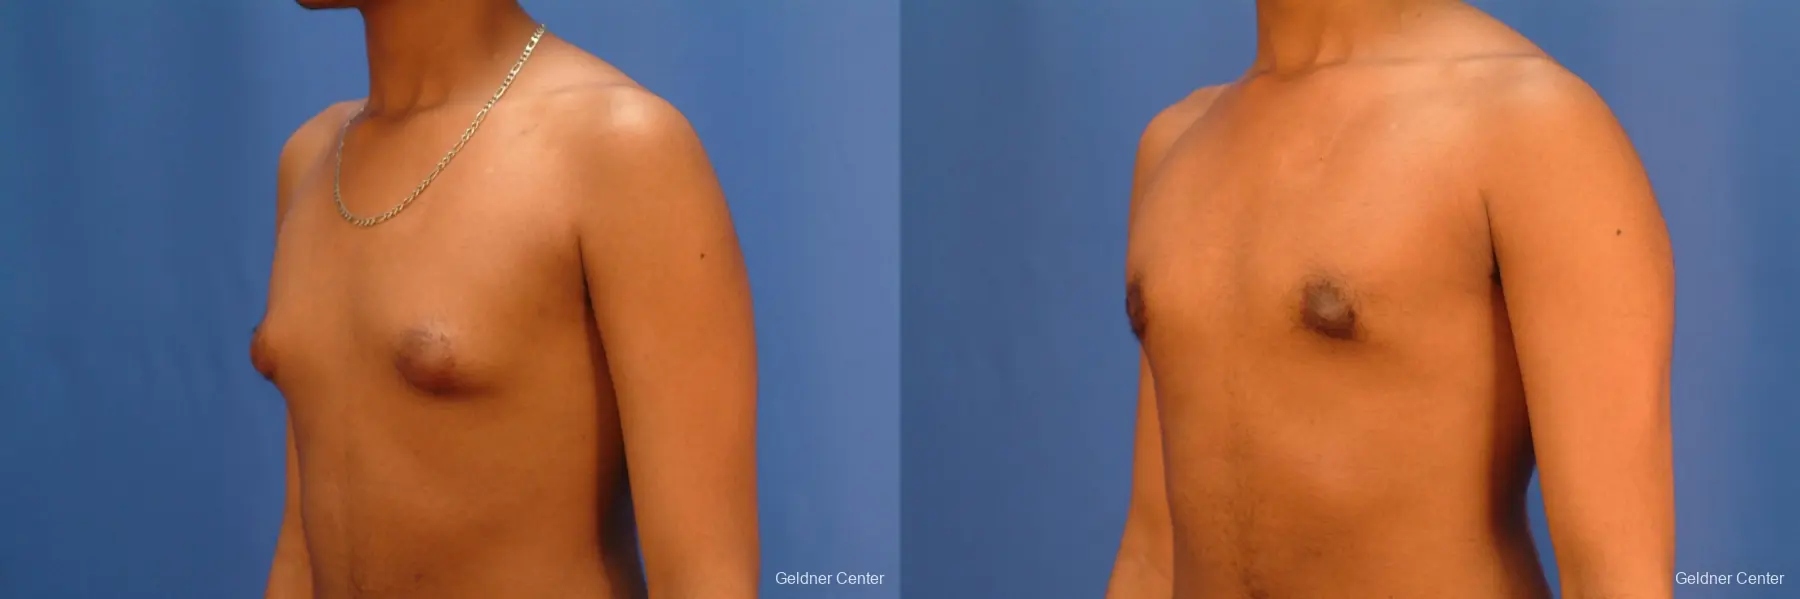 Gynecomastia: Patient 5 - Before and After 5